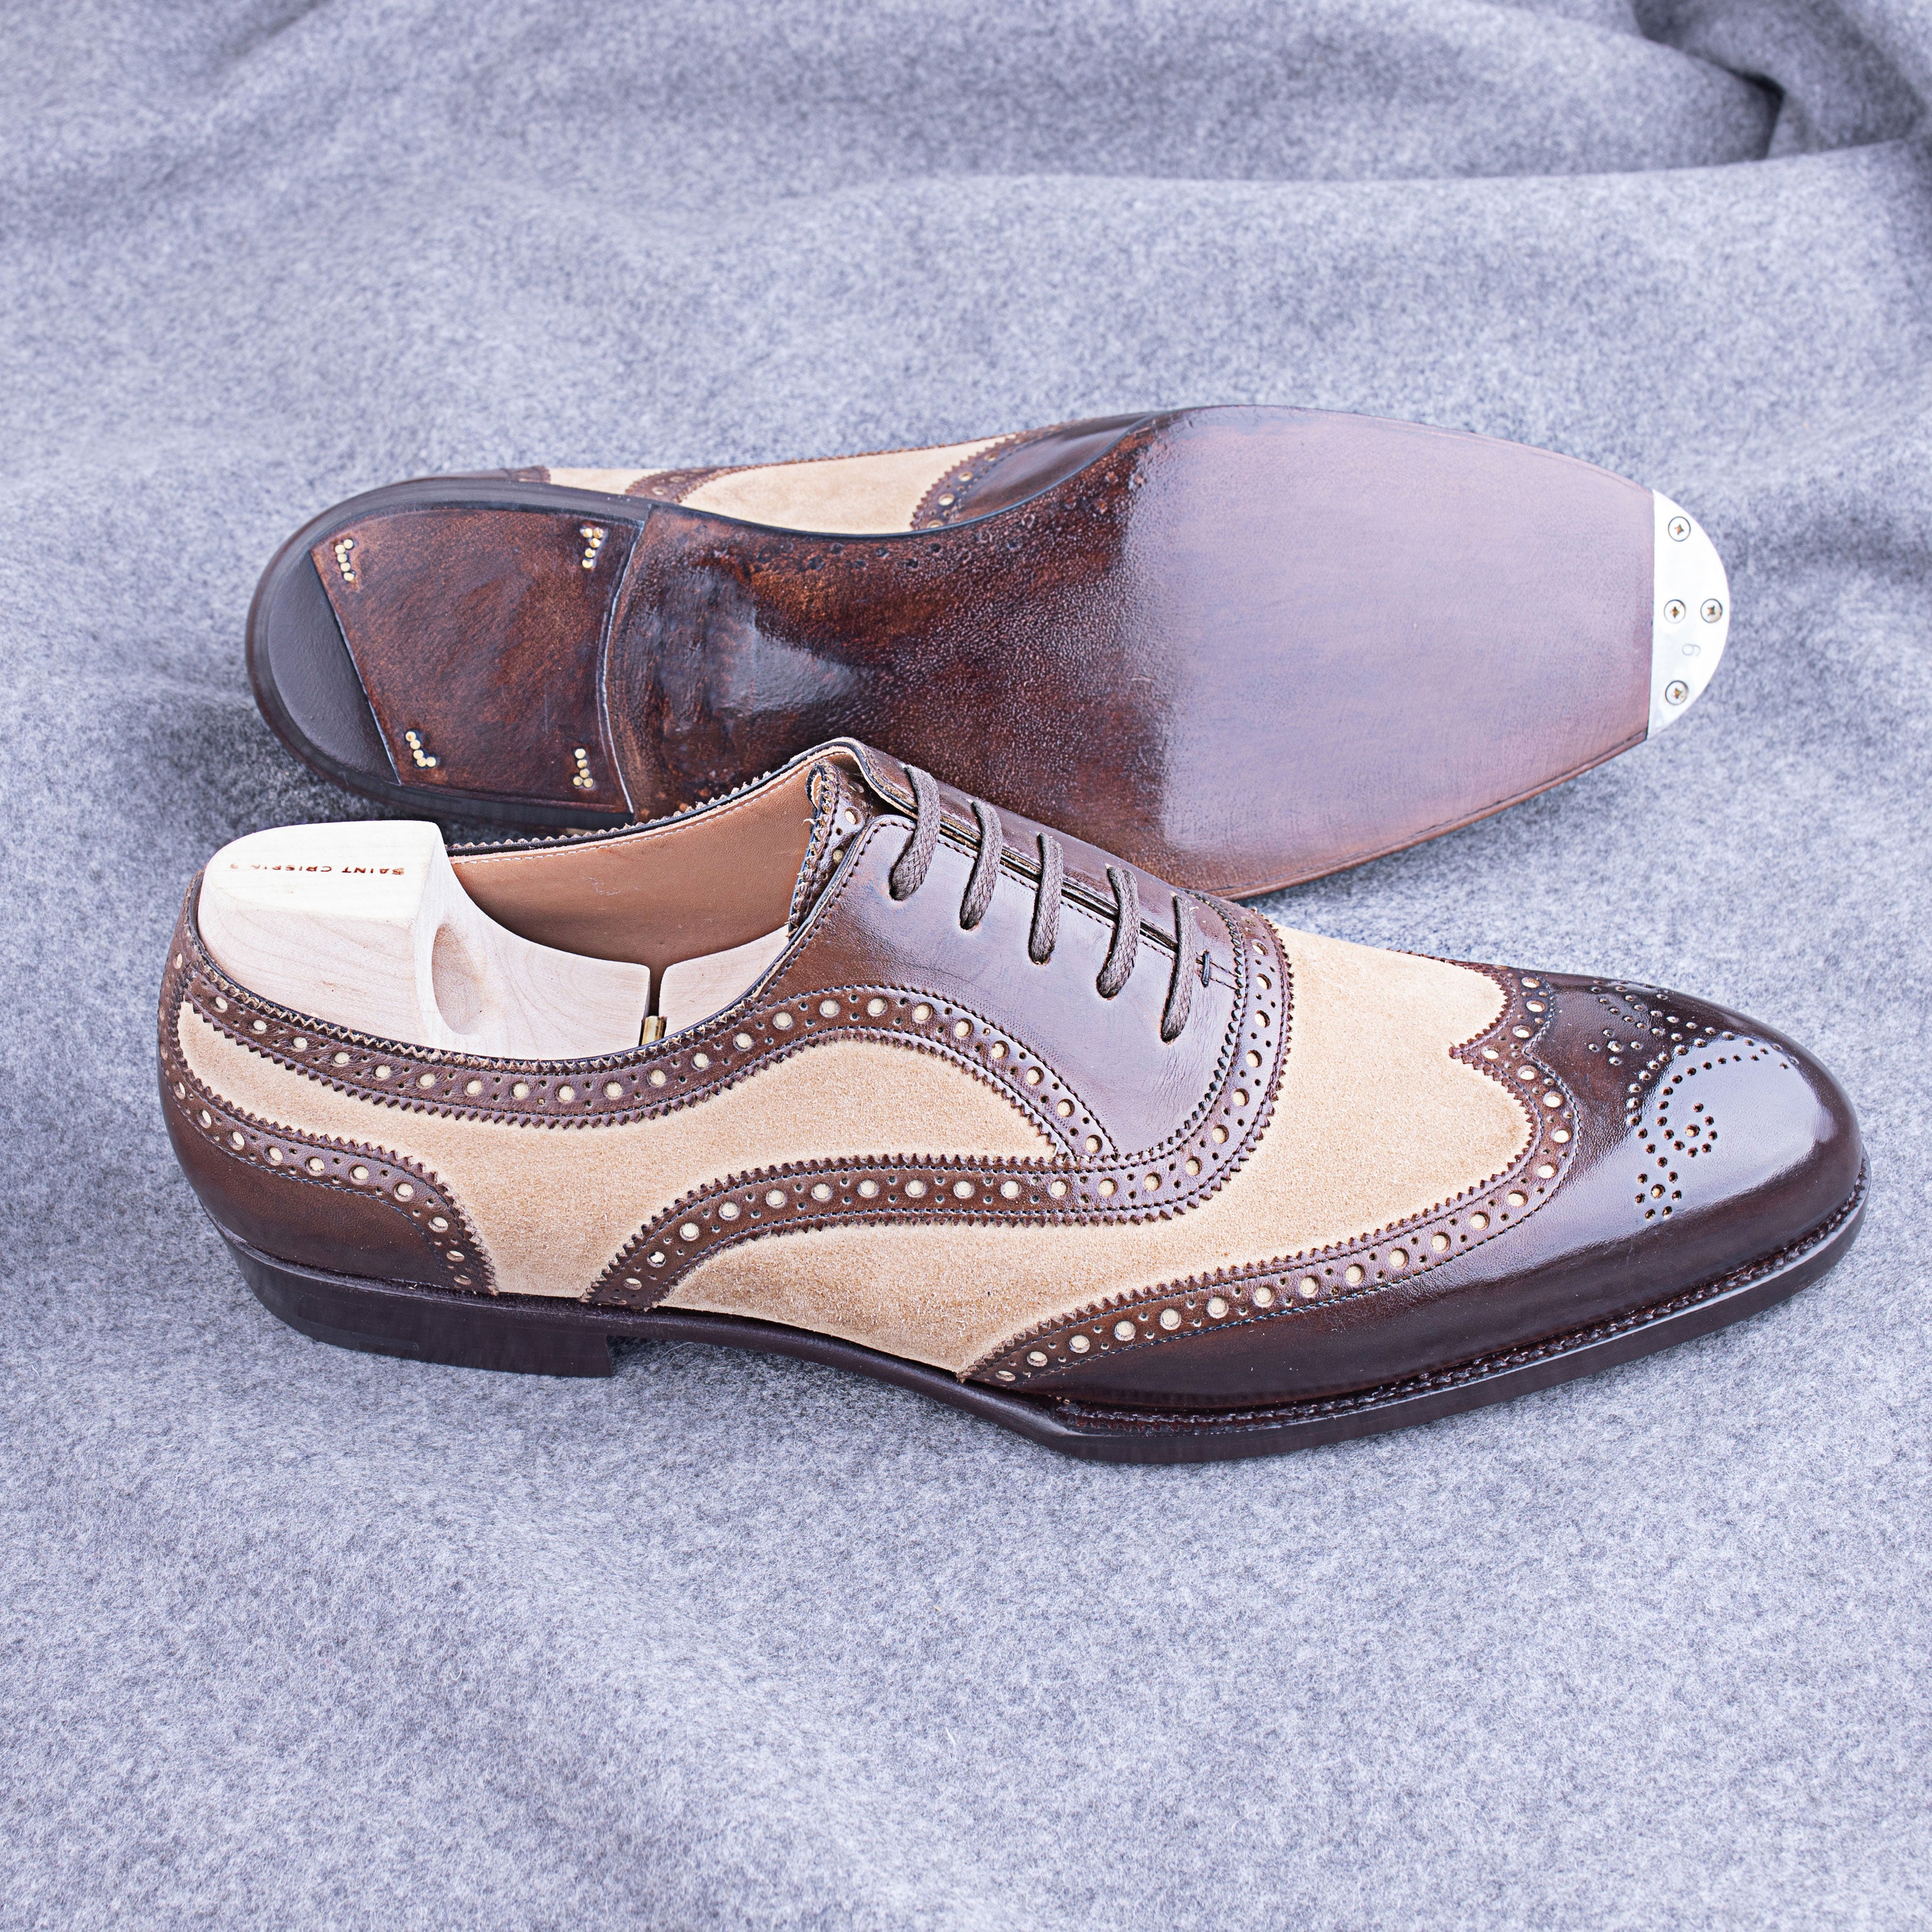 Oxford in leather and canvas, full brogueing, cuban heel – Saint Crispin's